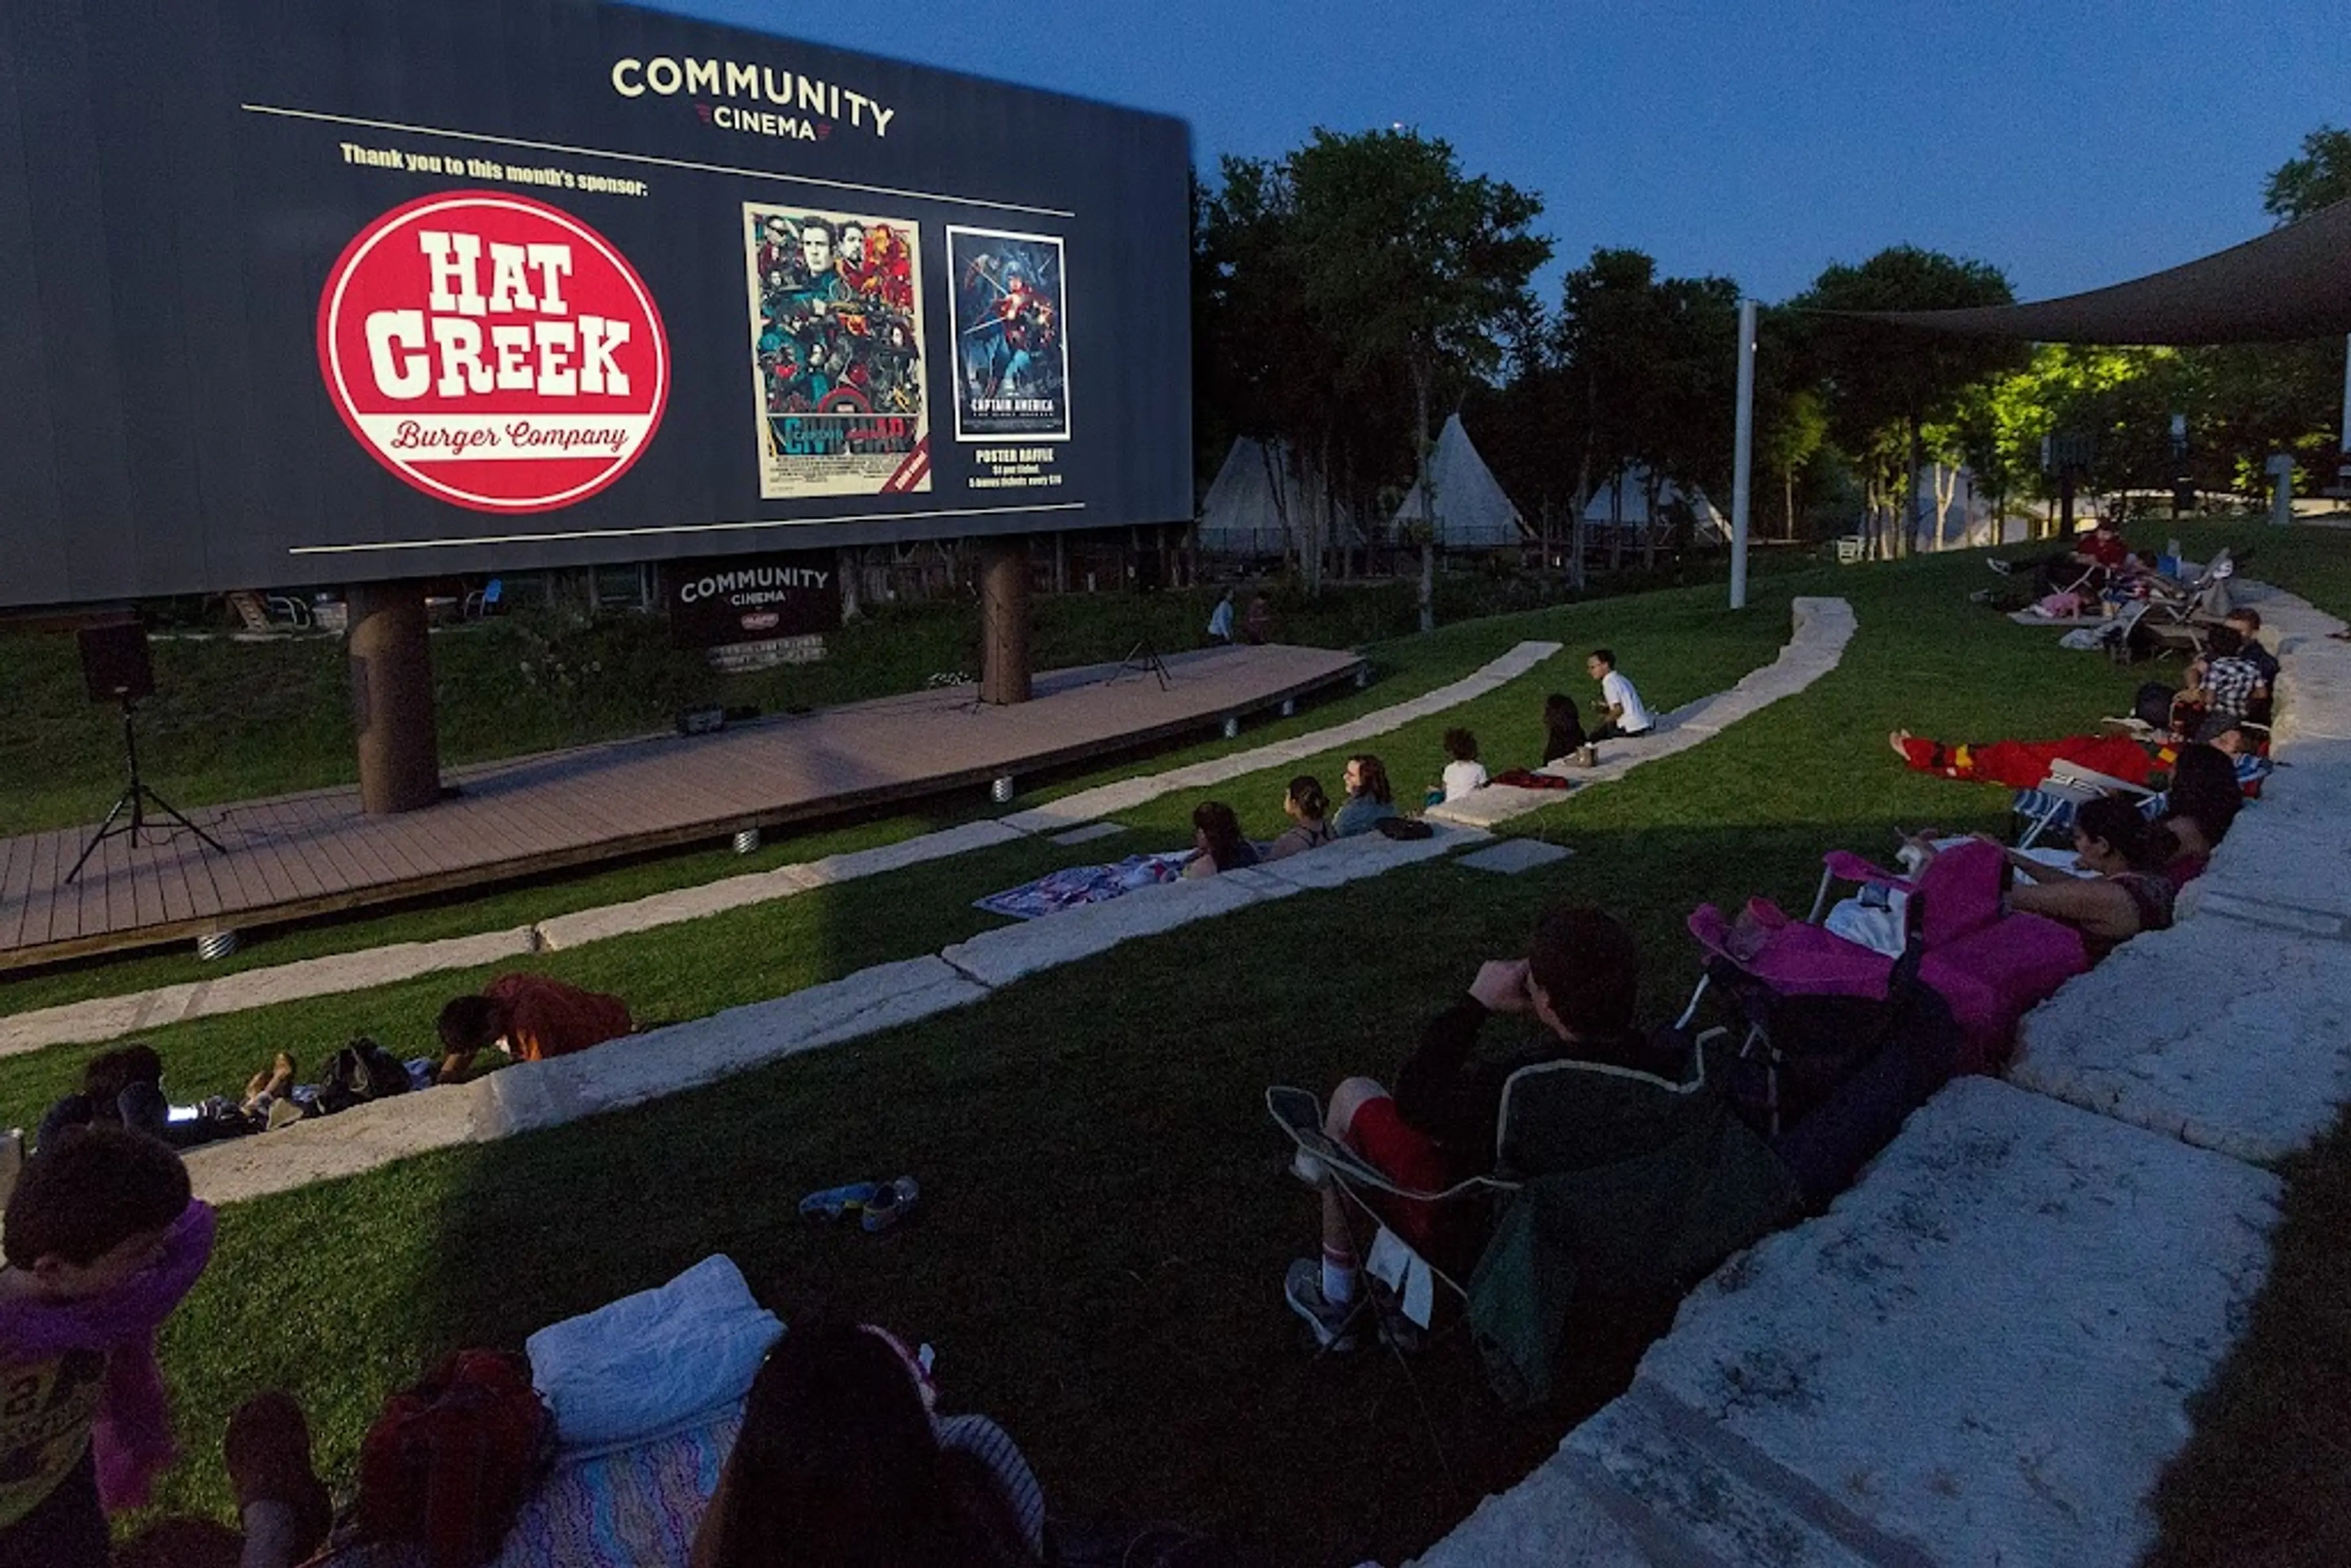 Outdoor theater